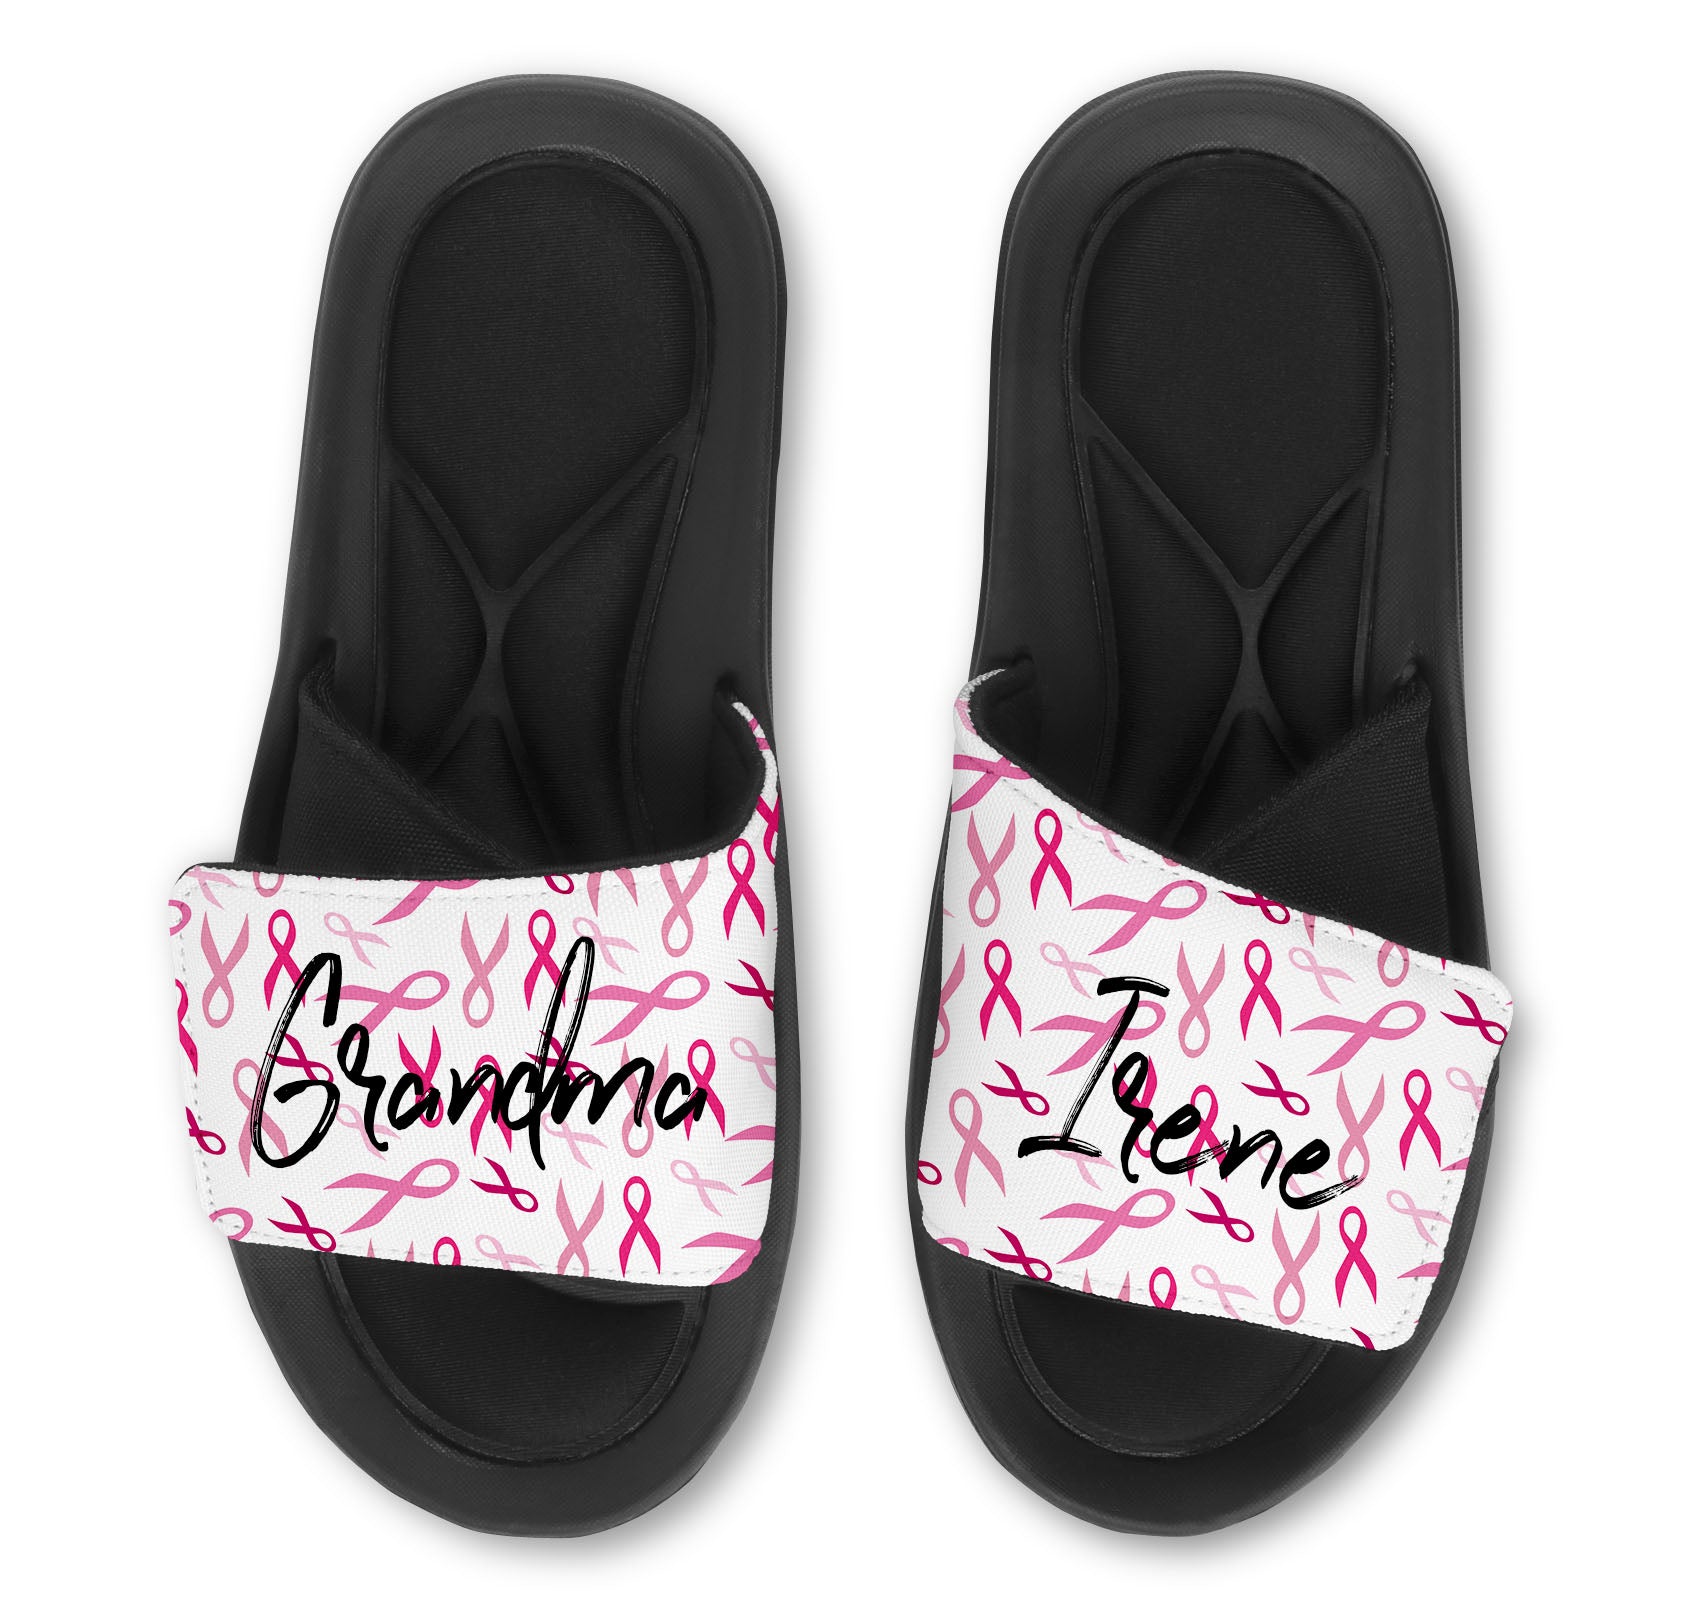 Breast Cancer Awareness Slides - Customize with Your Name